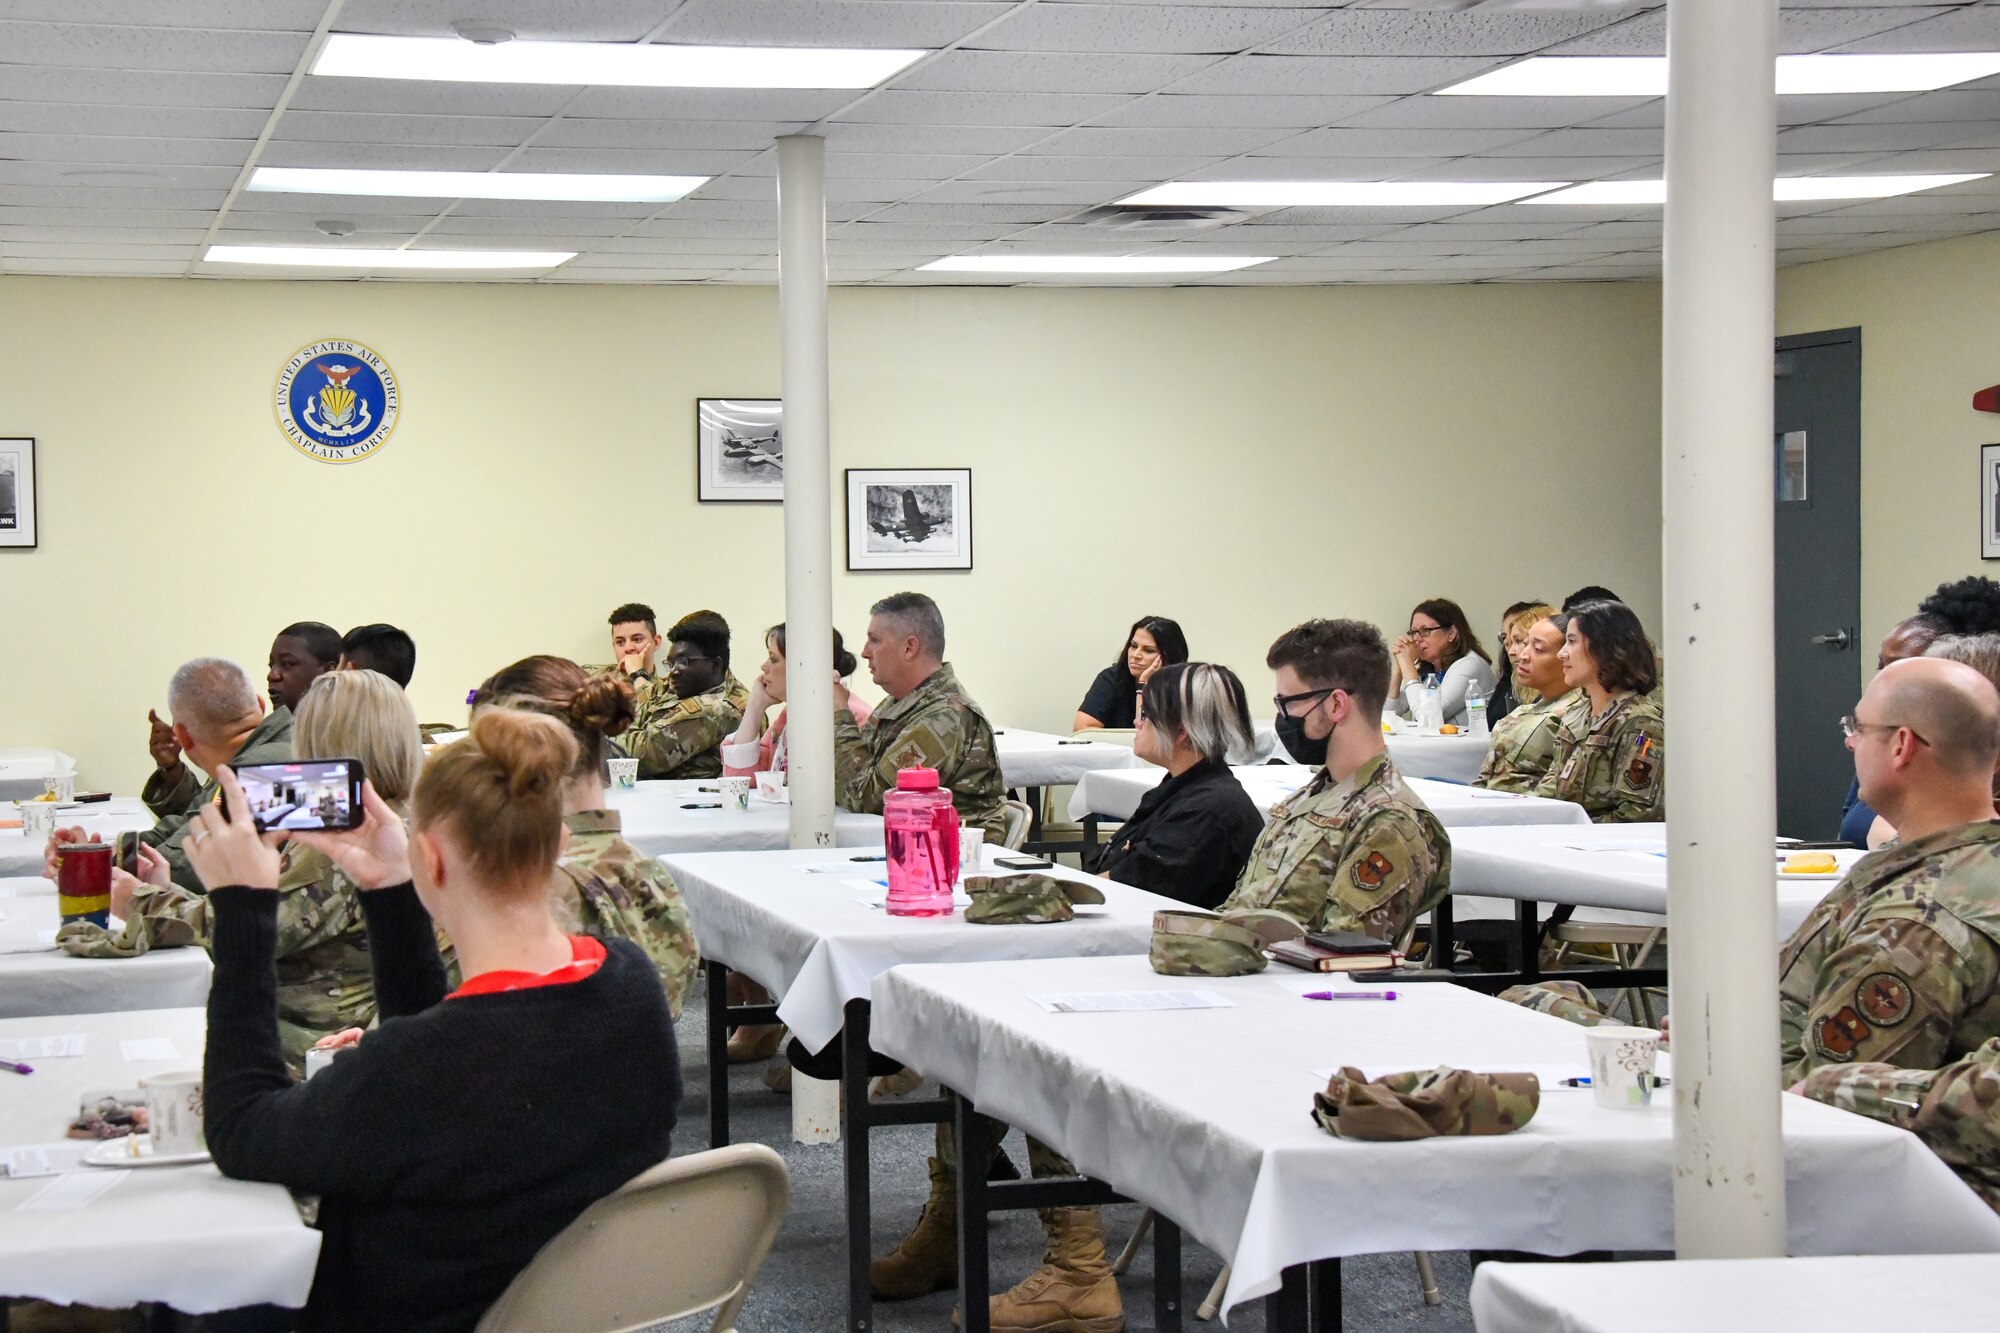 Airmen from the 97th Air Mobility Wing listen to an LGBTQ+ discussion panel at Altus Air Force Base, Oklahoma, June 10, 2022. More than 30 Airmen attended the event. (U.S. Air Force photo by Airman 1st Class Miyah Gray)